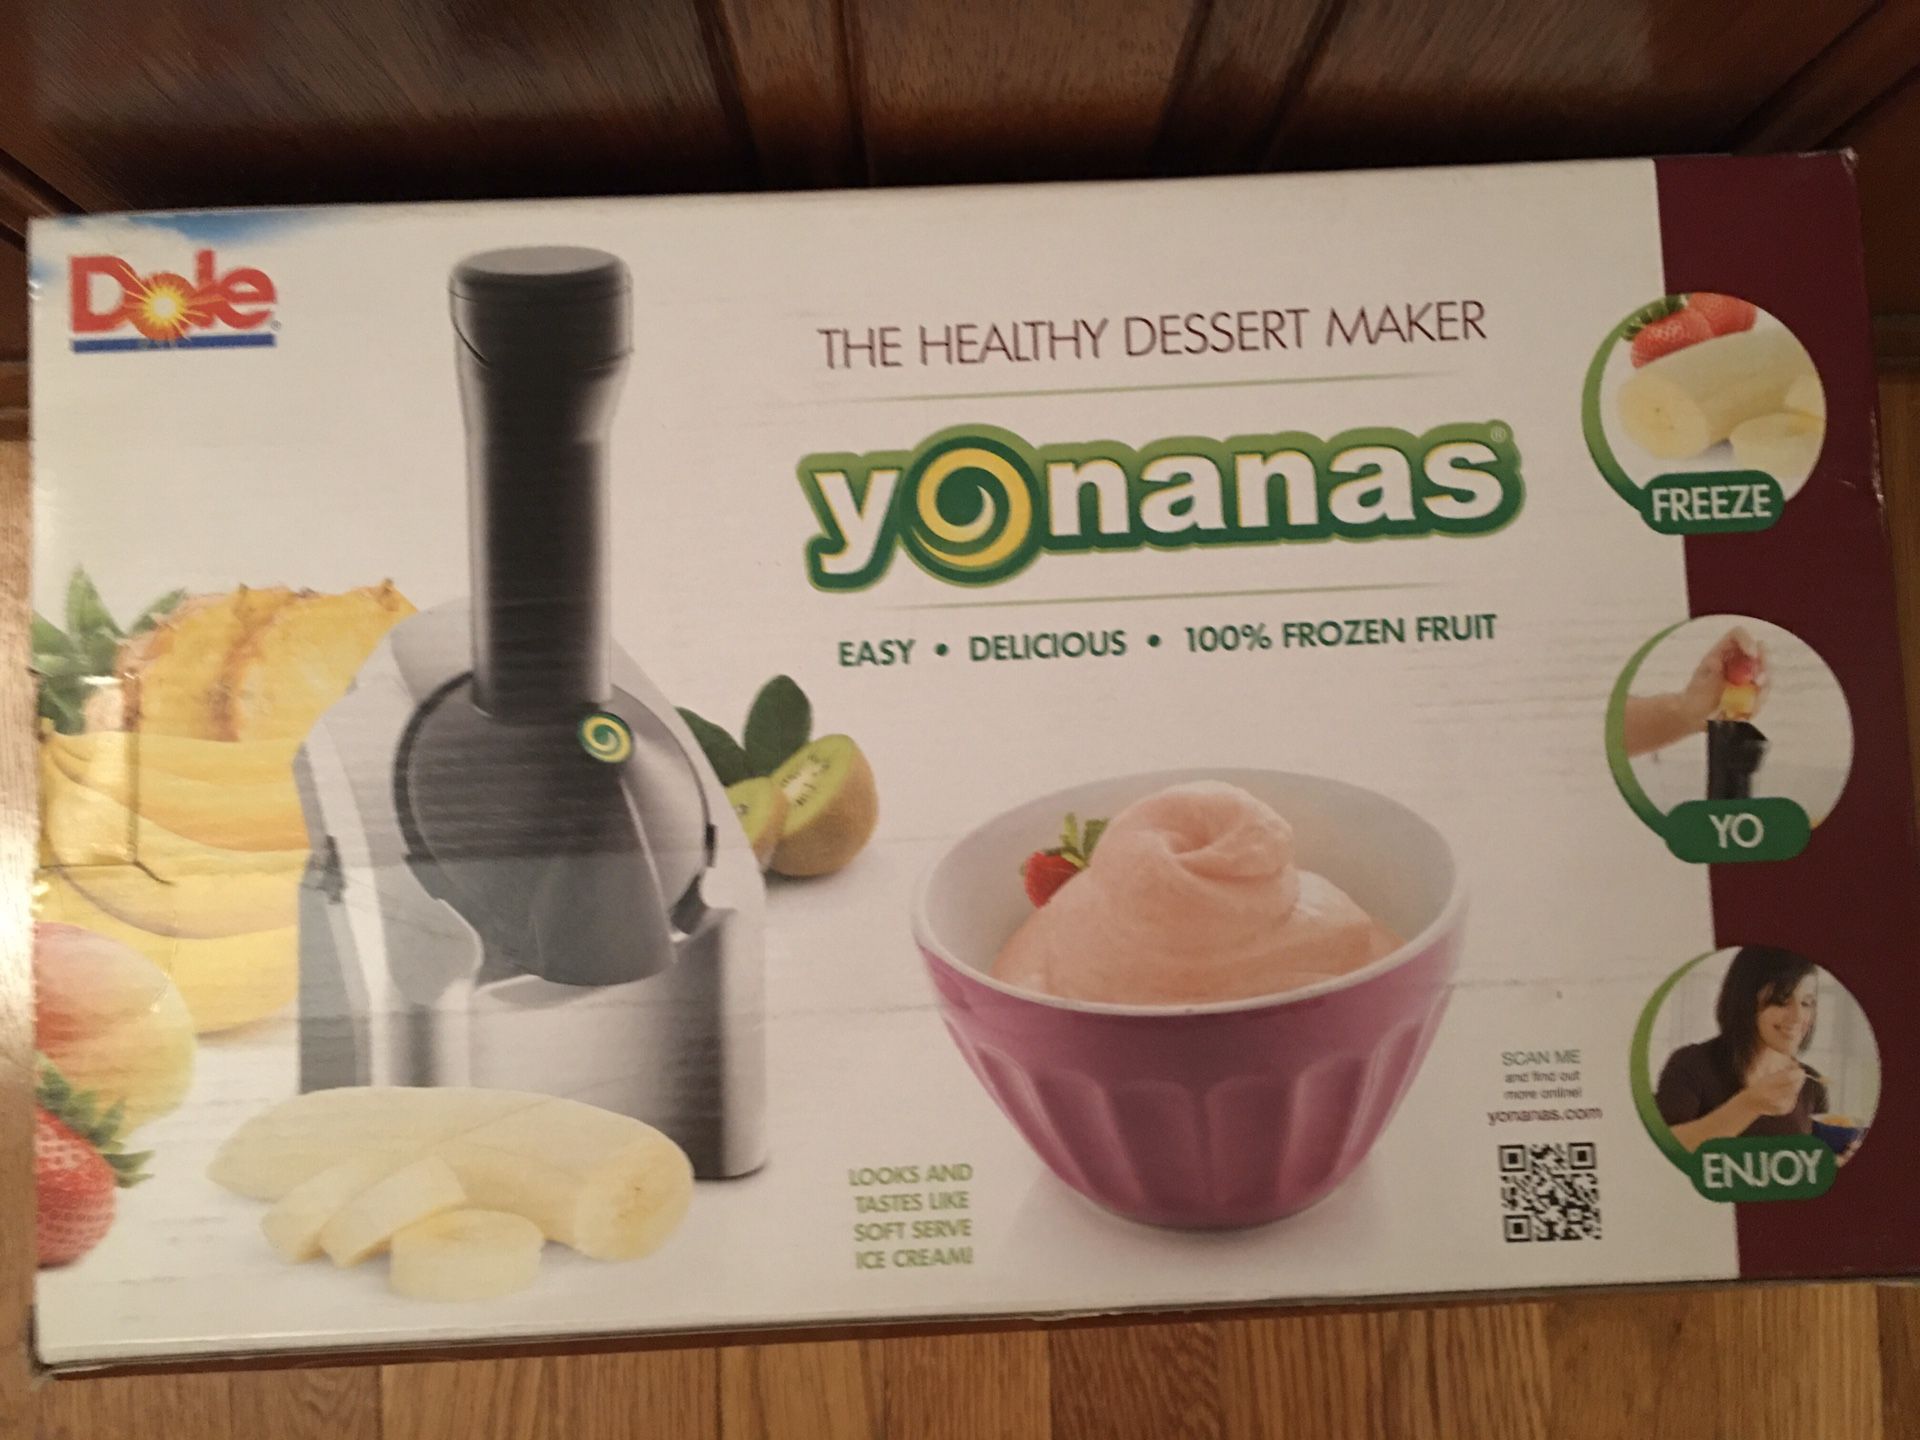 Summer Cleaning Sale: Dole Yonanas *** NEW *** - Must Sell Quickly